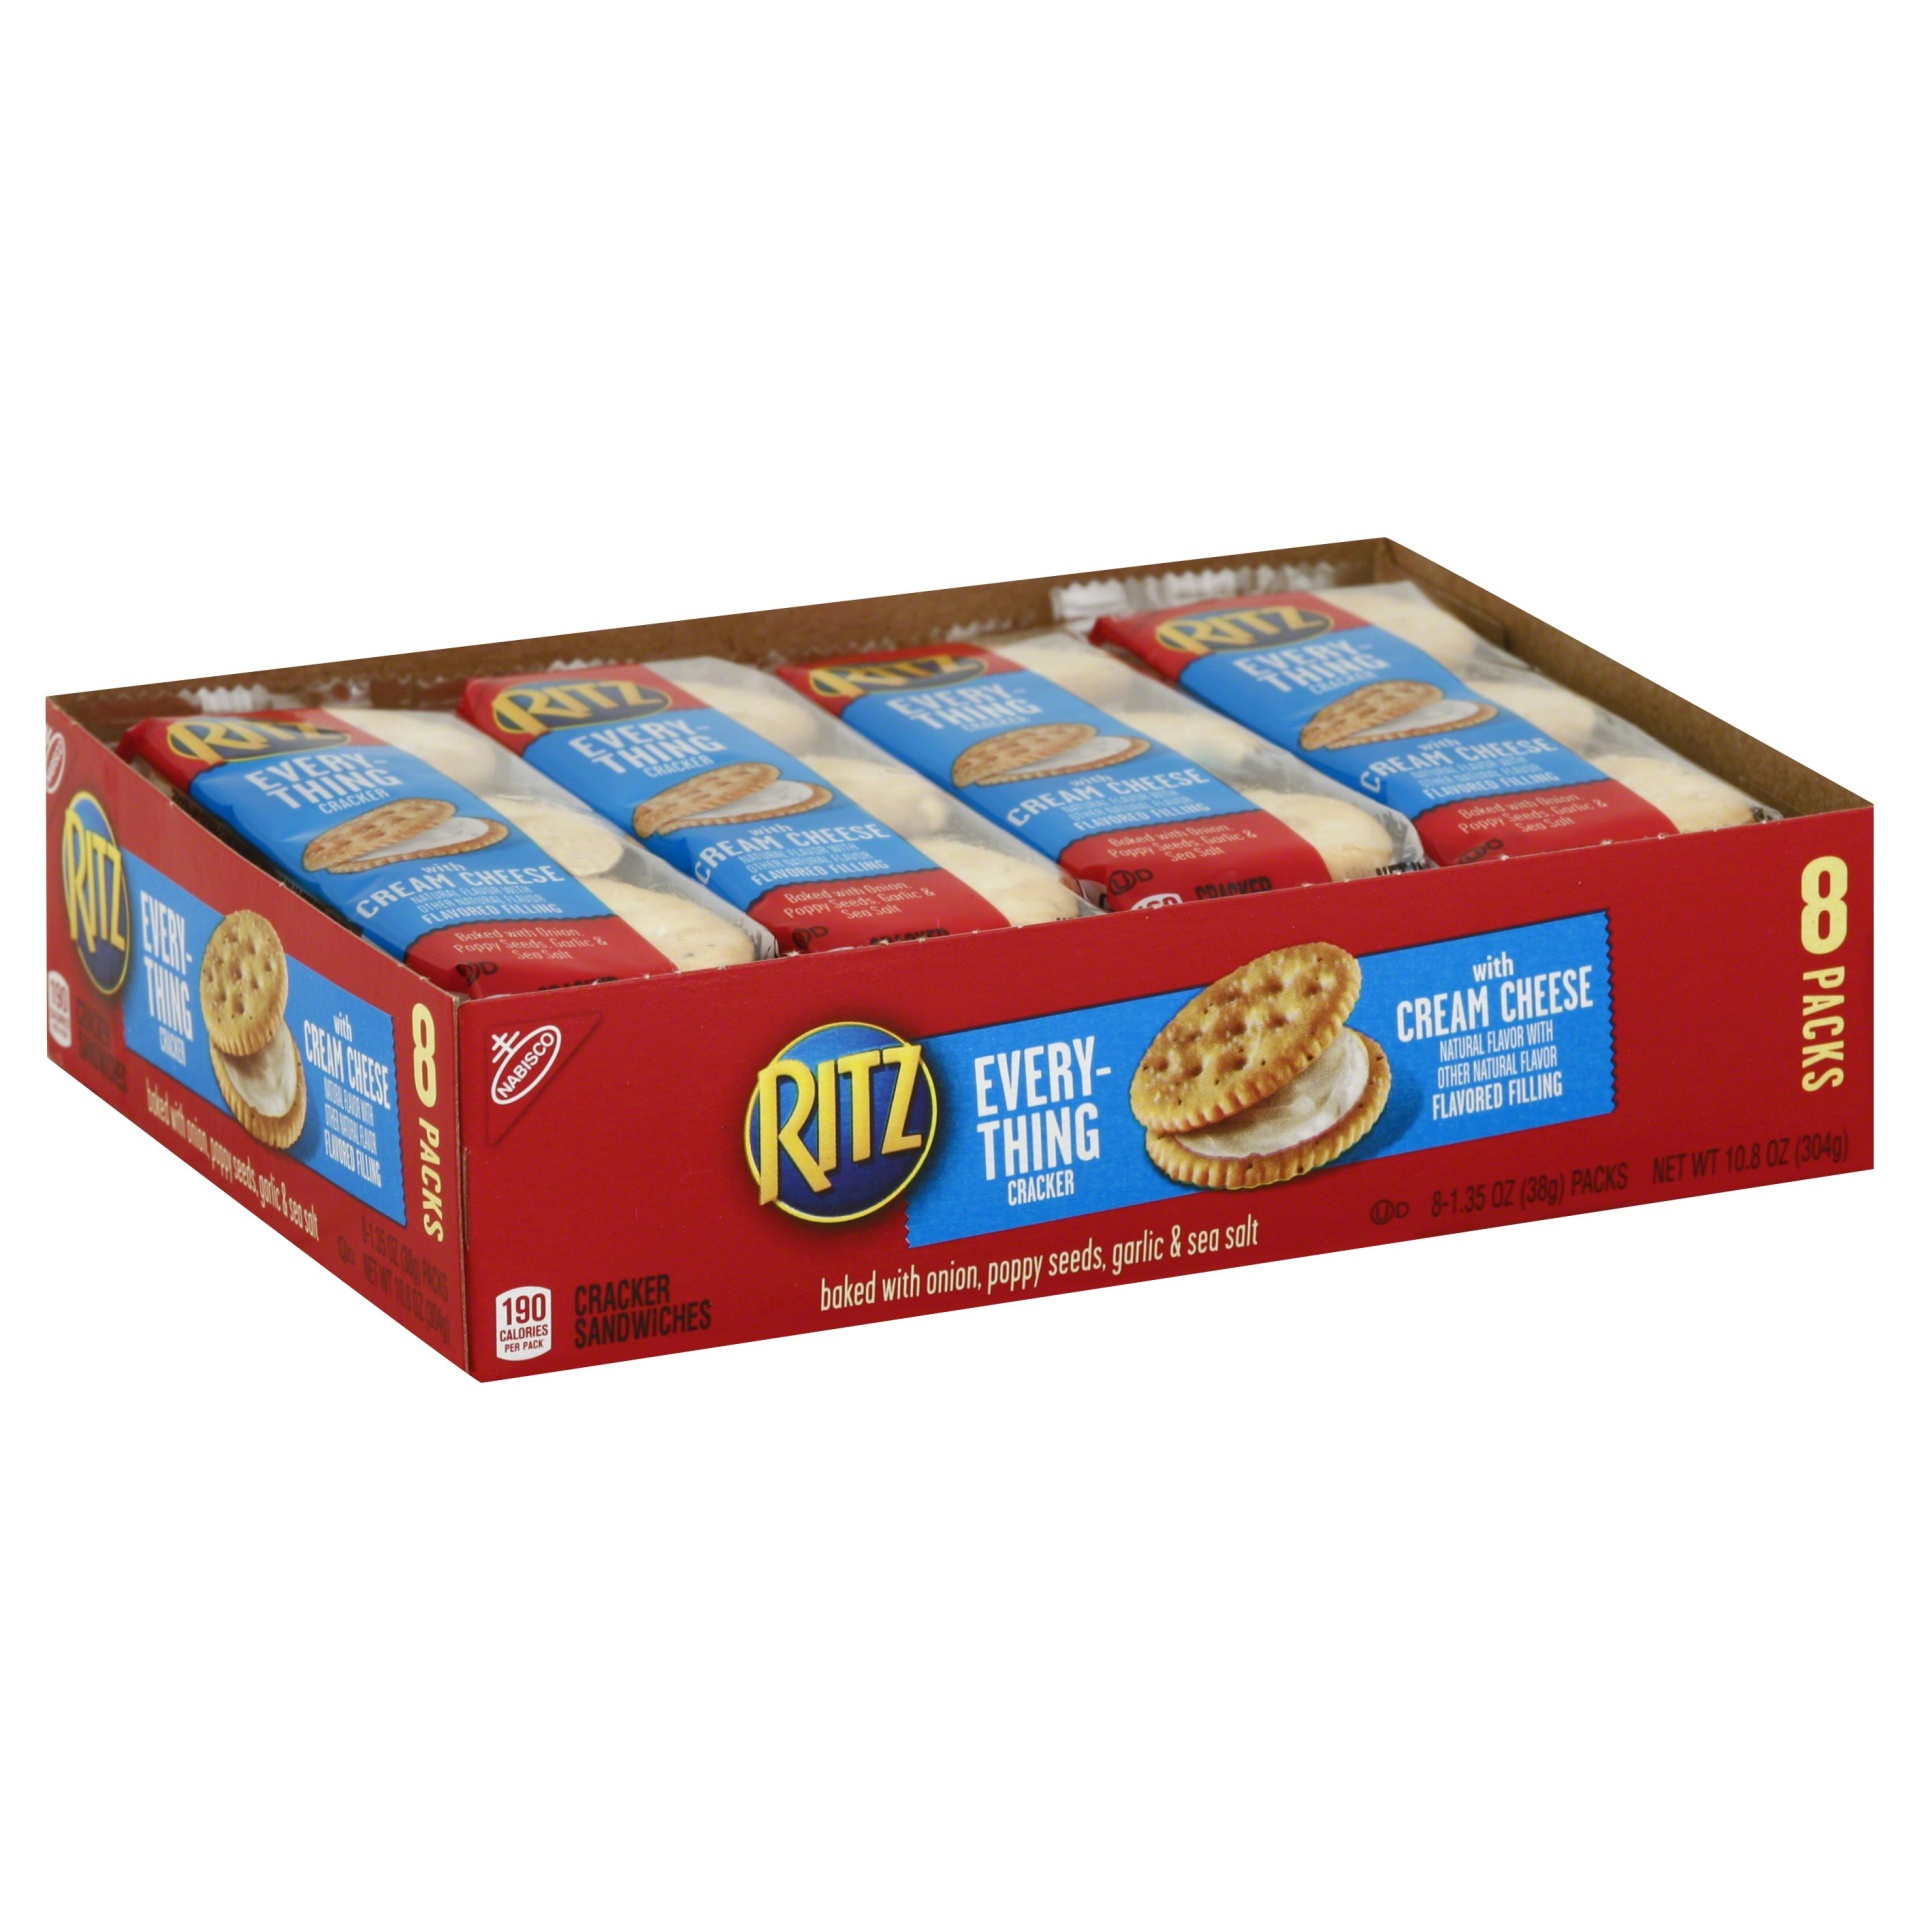 slide 1 of 1, Ritz Cracker Sandwiches, Everything Cracker, with Cream Cheese, 8 Pack, 8 ct